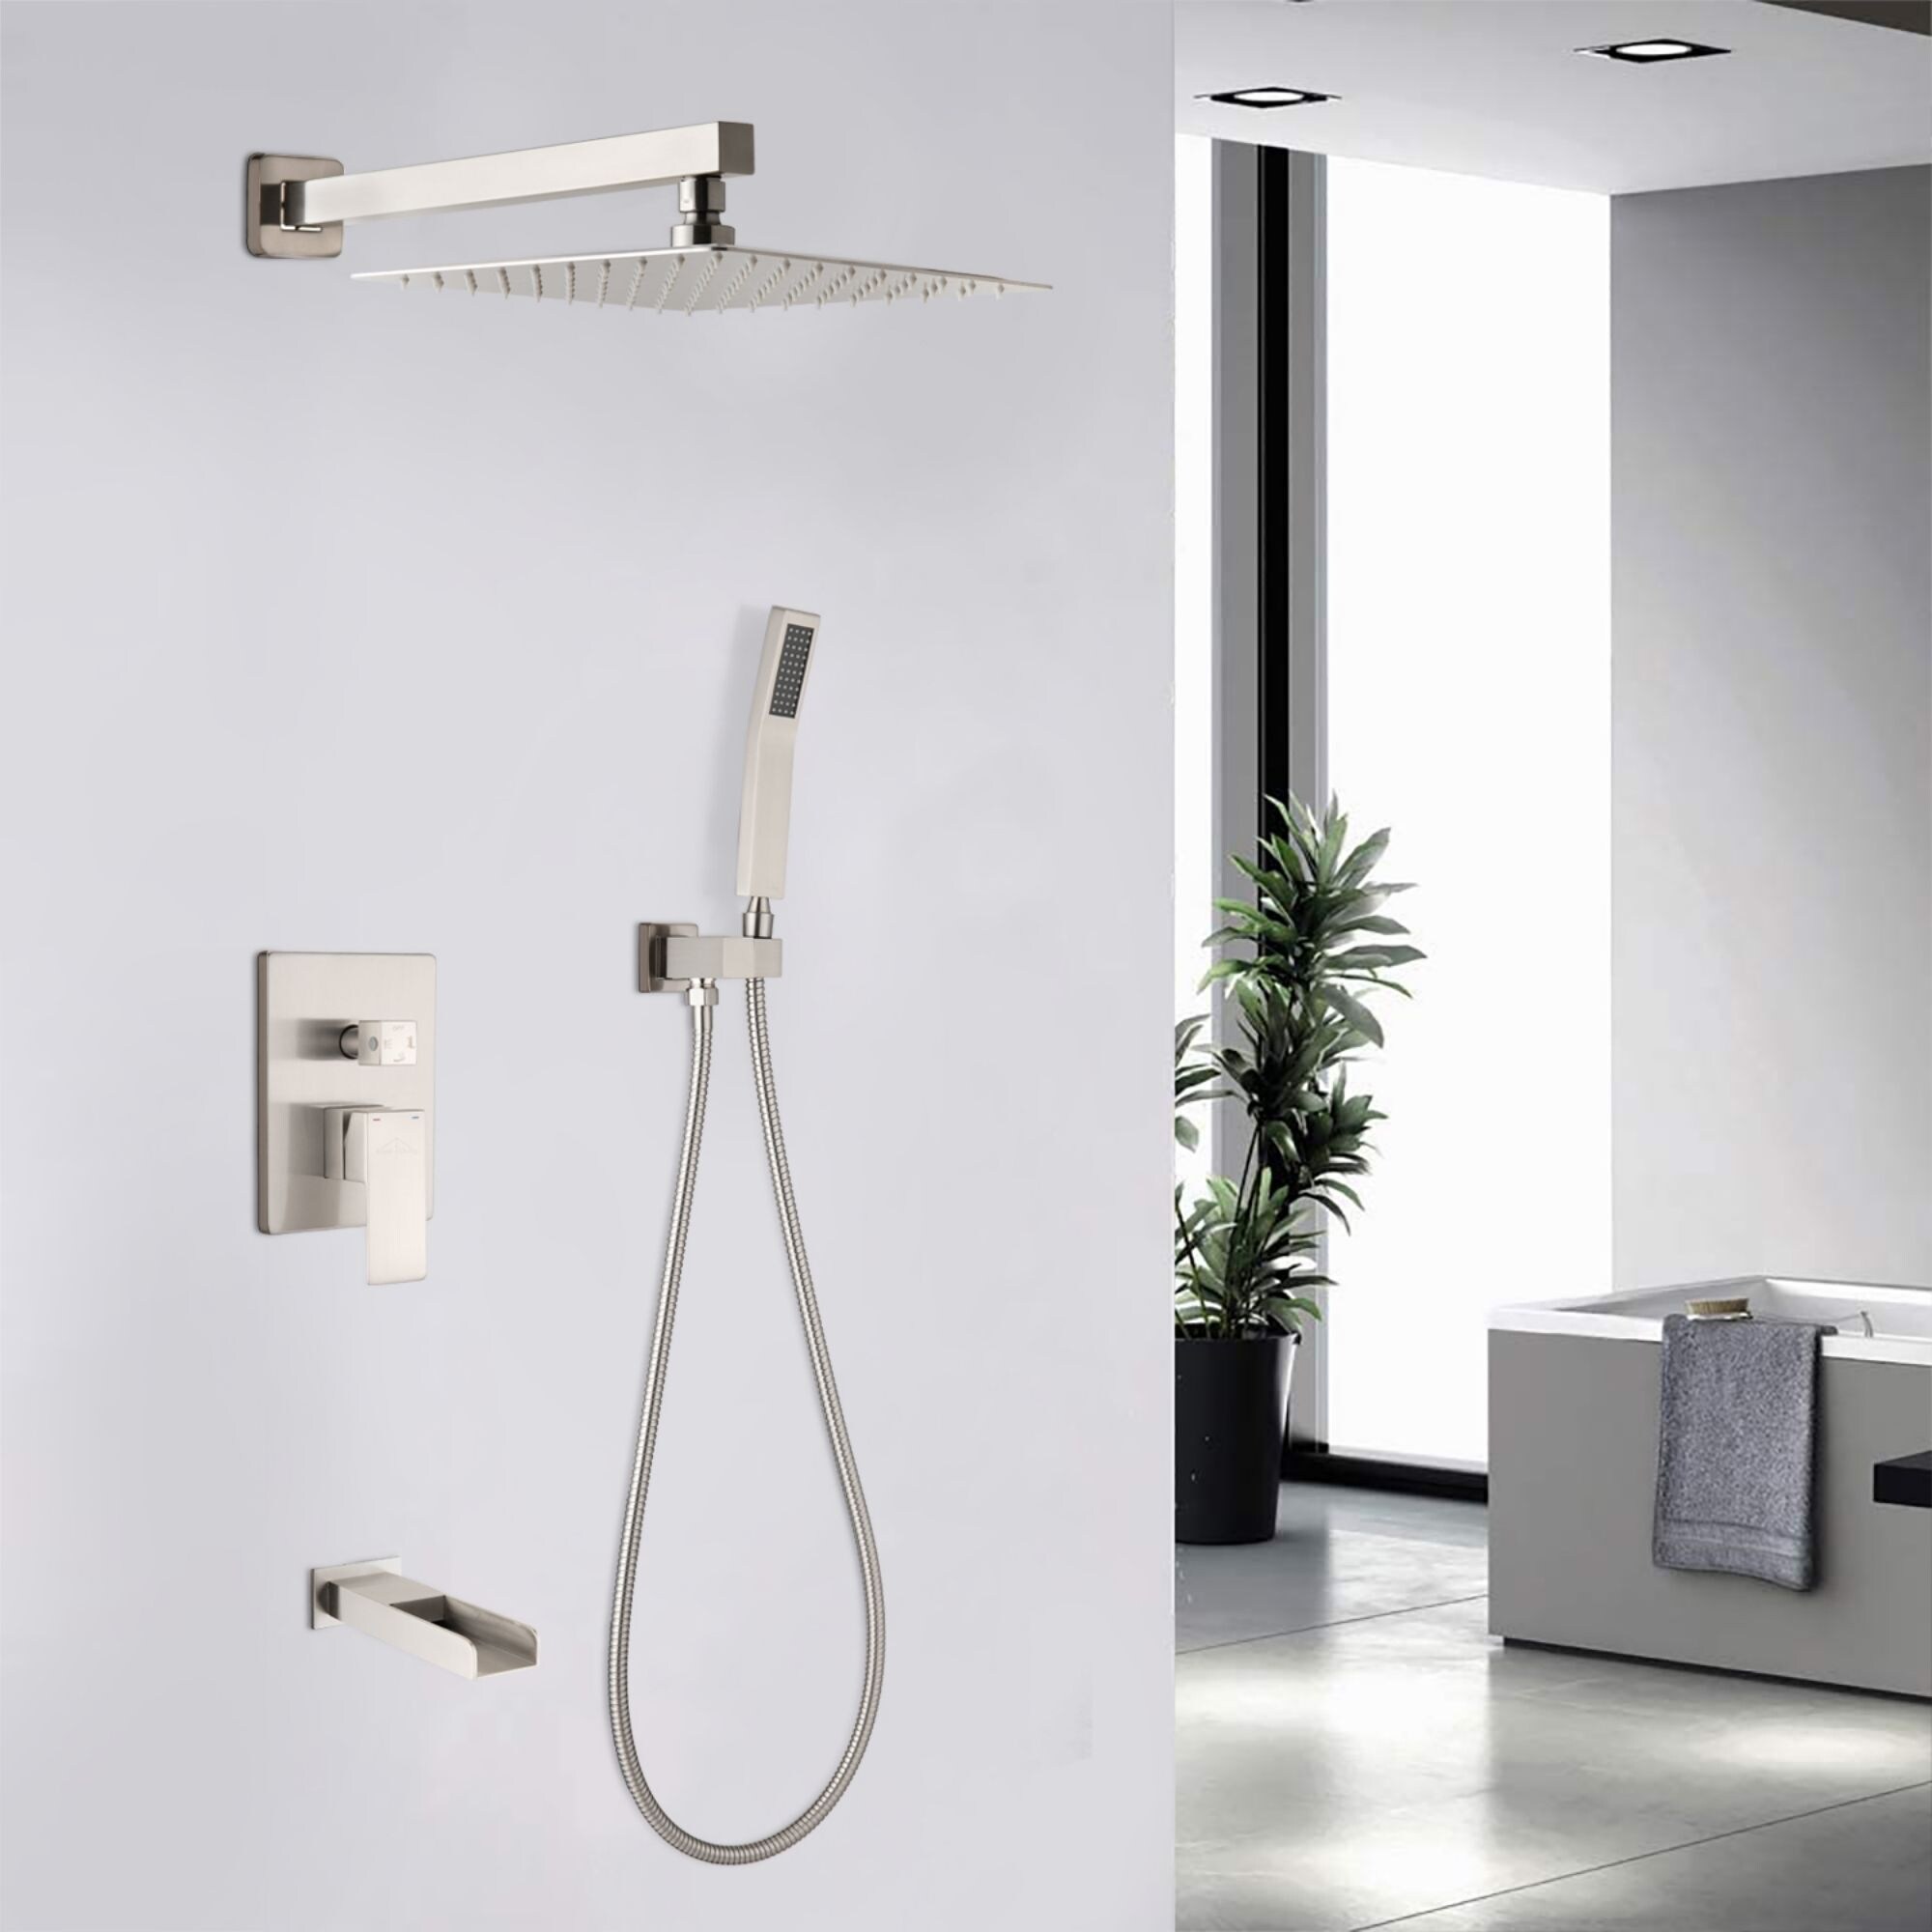 https://ak1.ostkcdn.com/images/products/is/images/direct/ce08ee1b27b9f88217f087c29017b216c0bc330b/Clihome-12-Inch-Wall-Mount-Shower-System-Shower-Combo-Brushed-Nickel.jpg